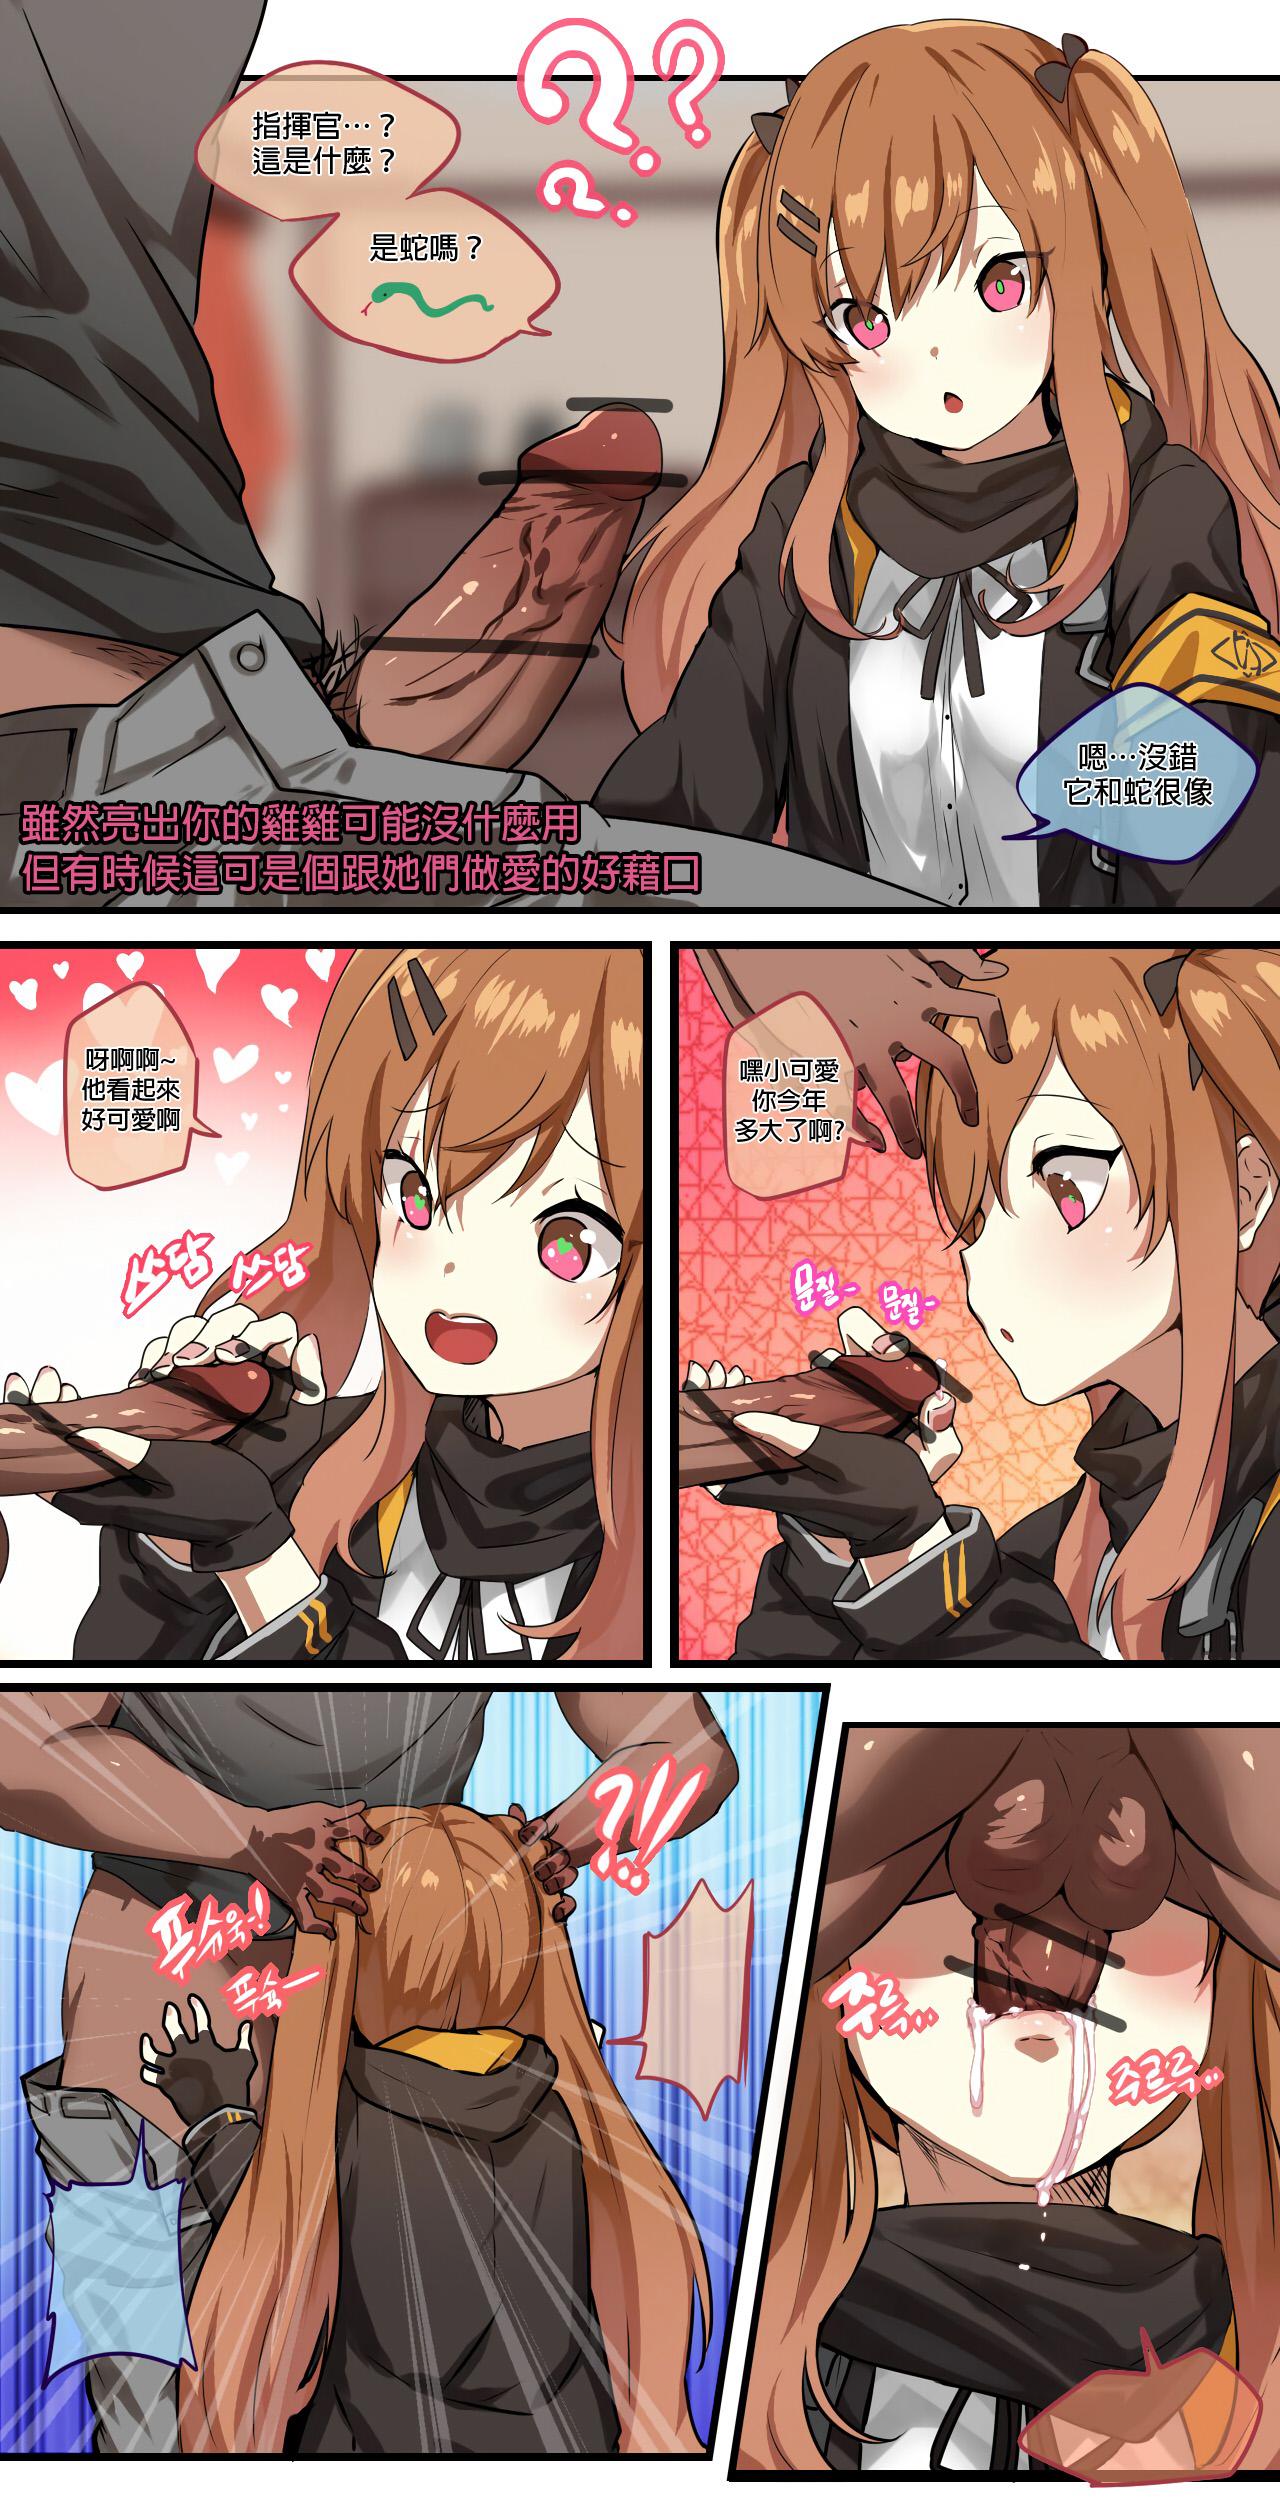 Pornstar How to use dolls 01 - Girls frontline Amateur Porn Free - Page 11